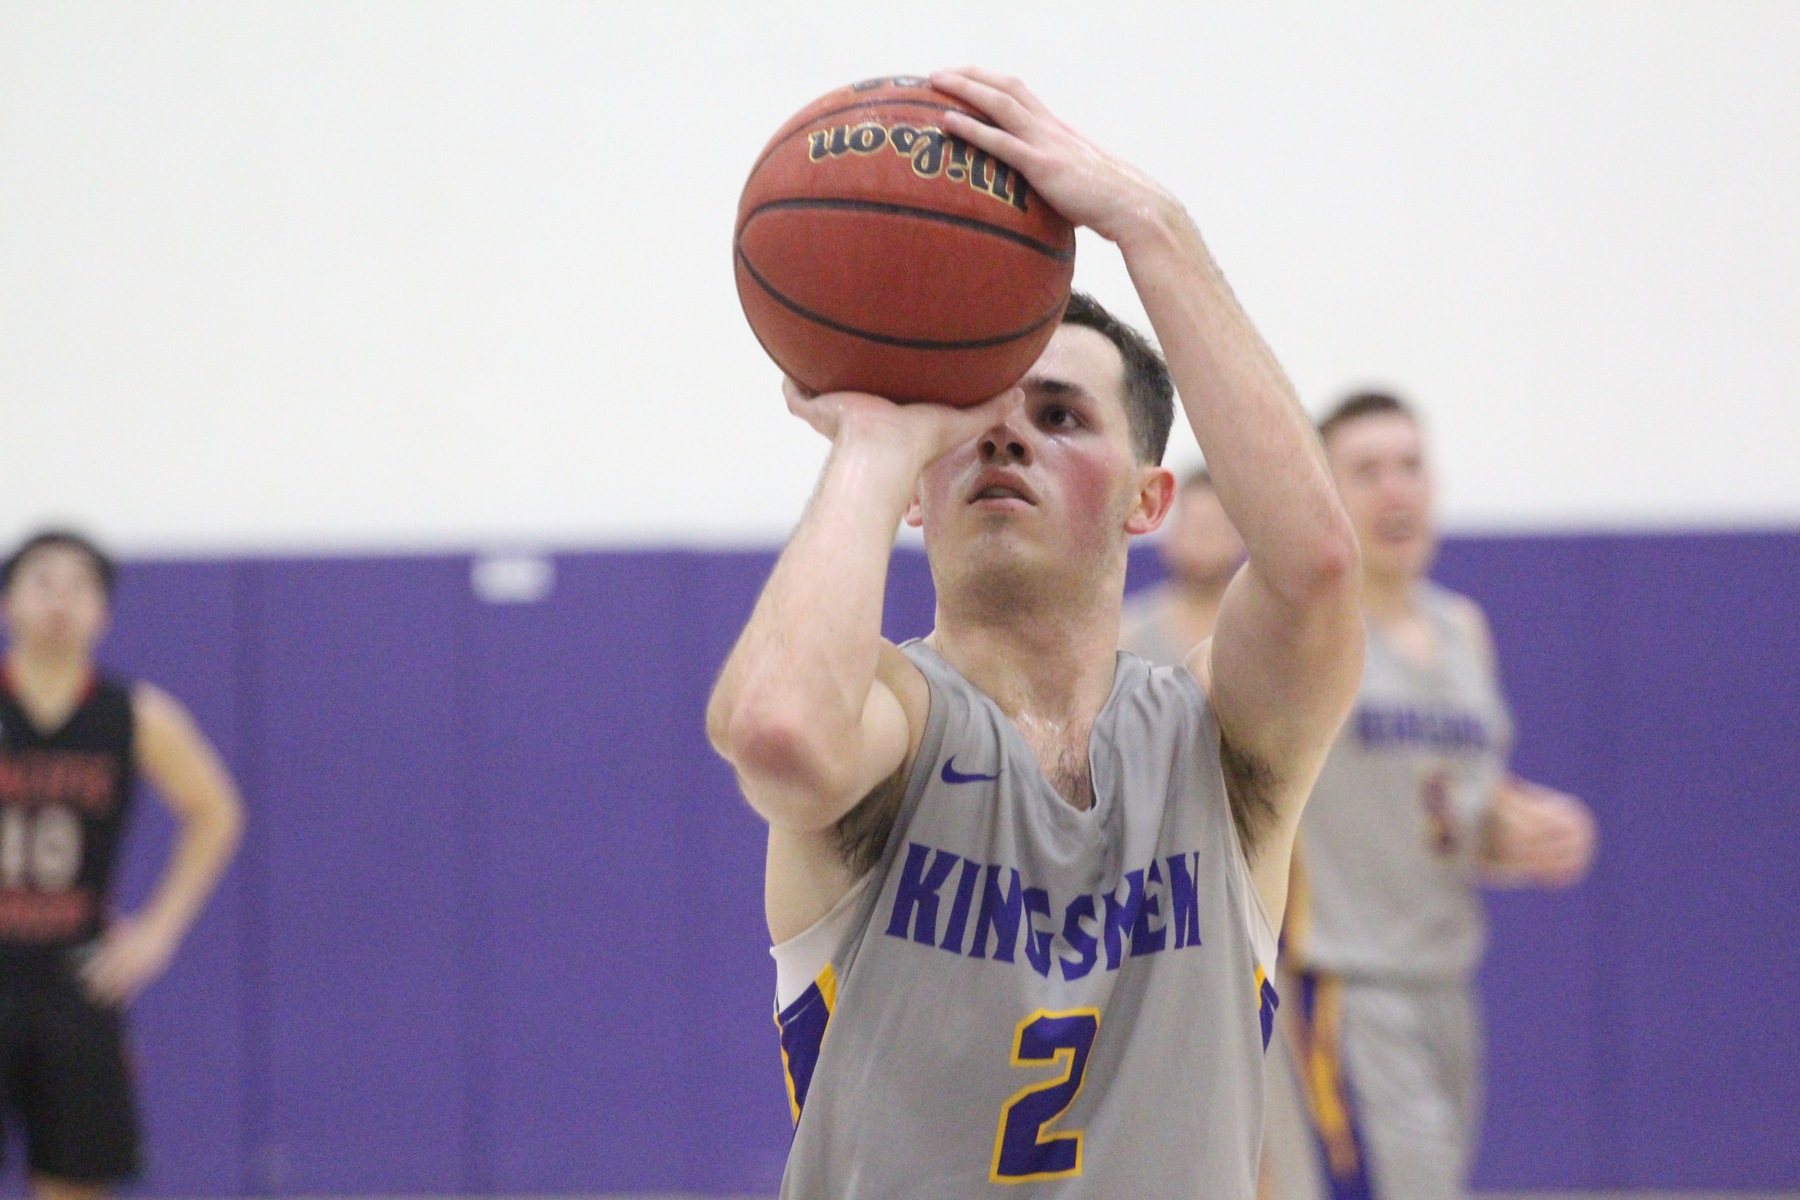 Wulbrun scored 15 points and tied his career-high against Redlands. (Photo: Danielle Roumbos)